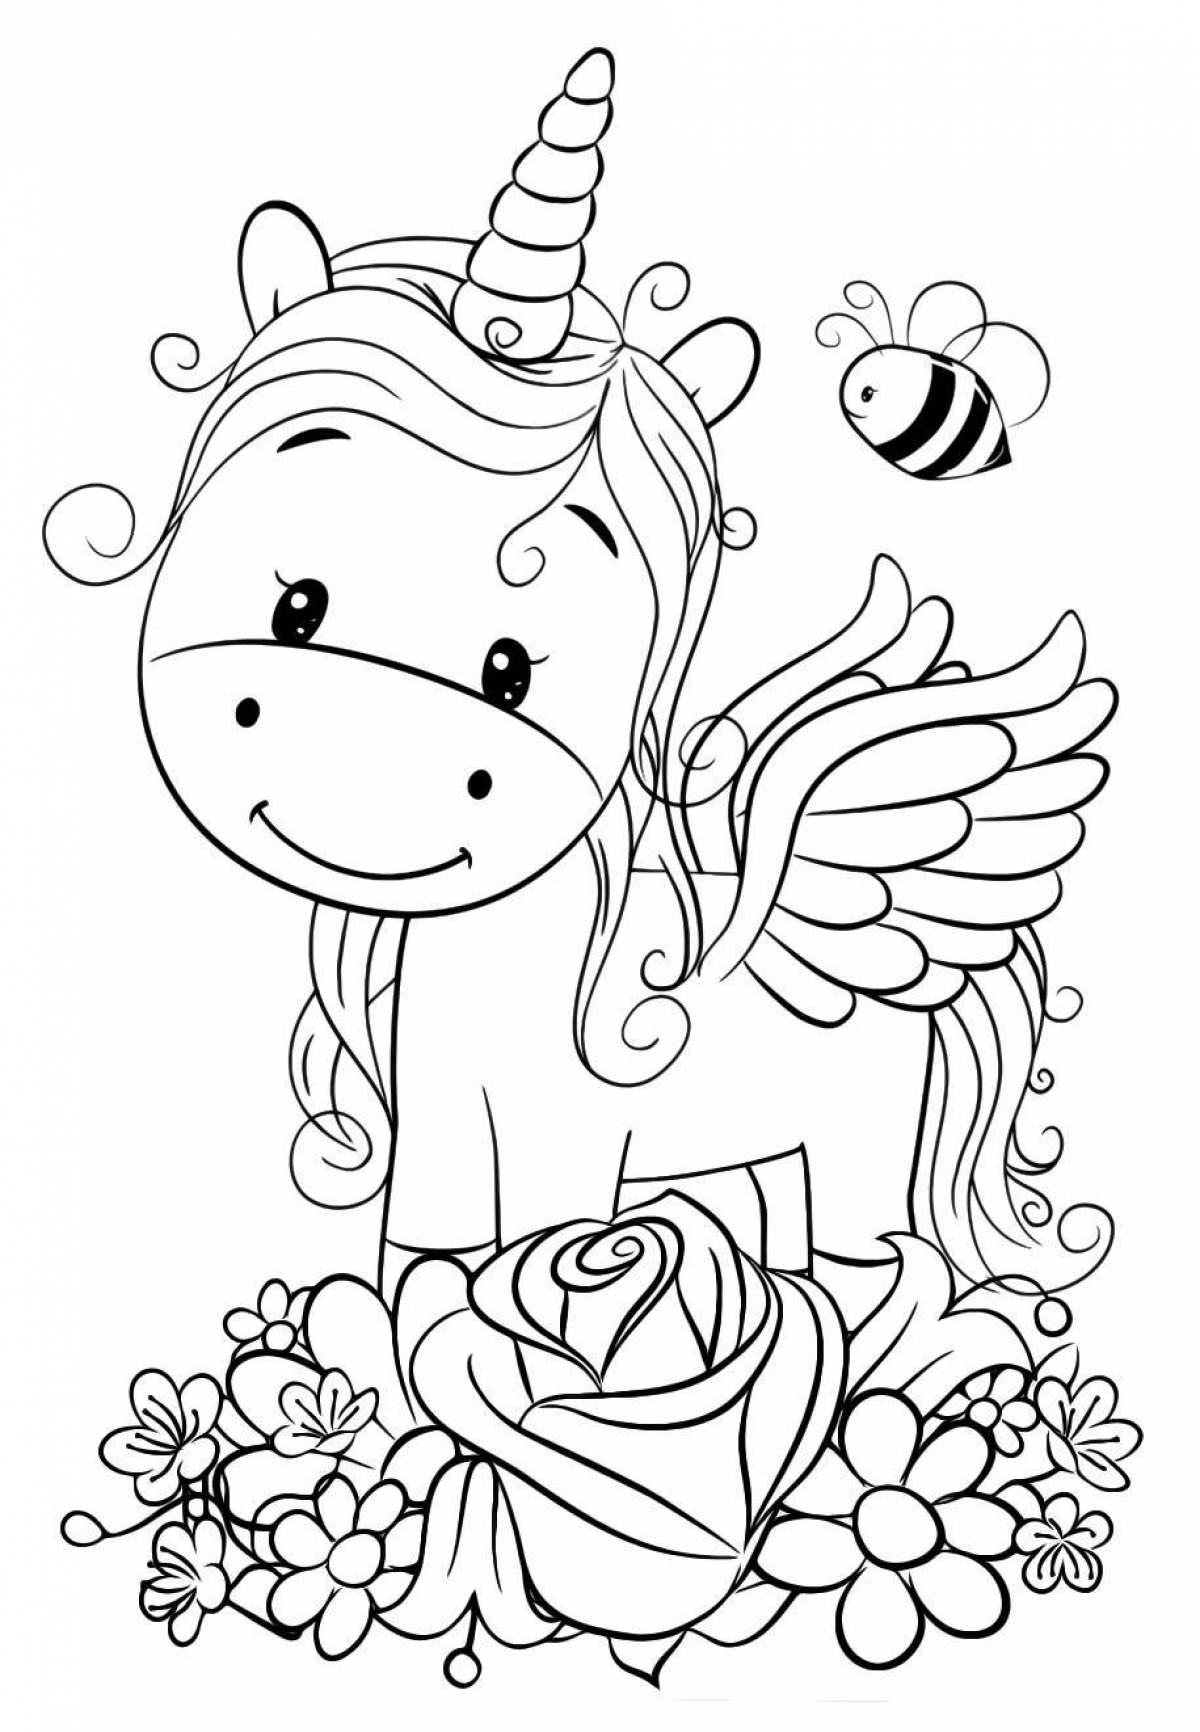 Cute coloring book for girls 7 years old unicorn